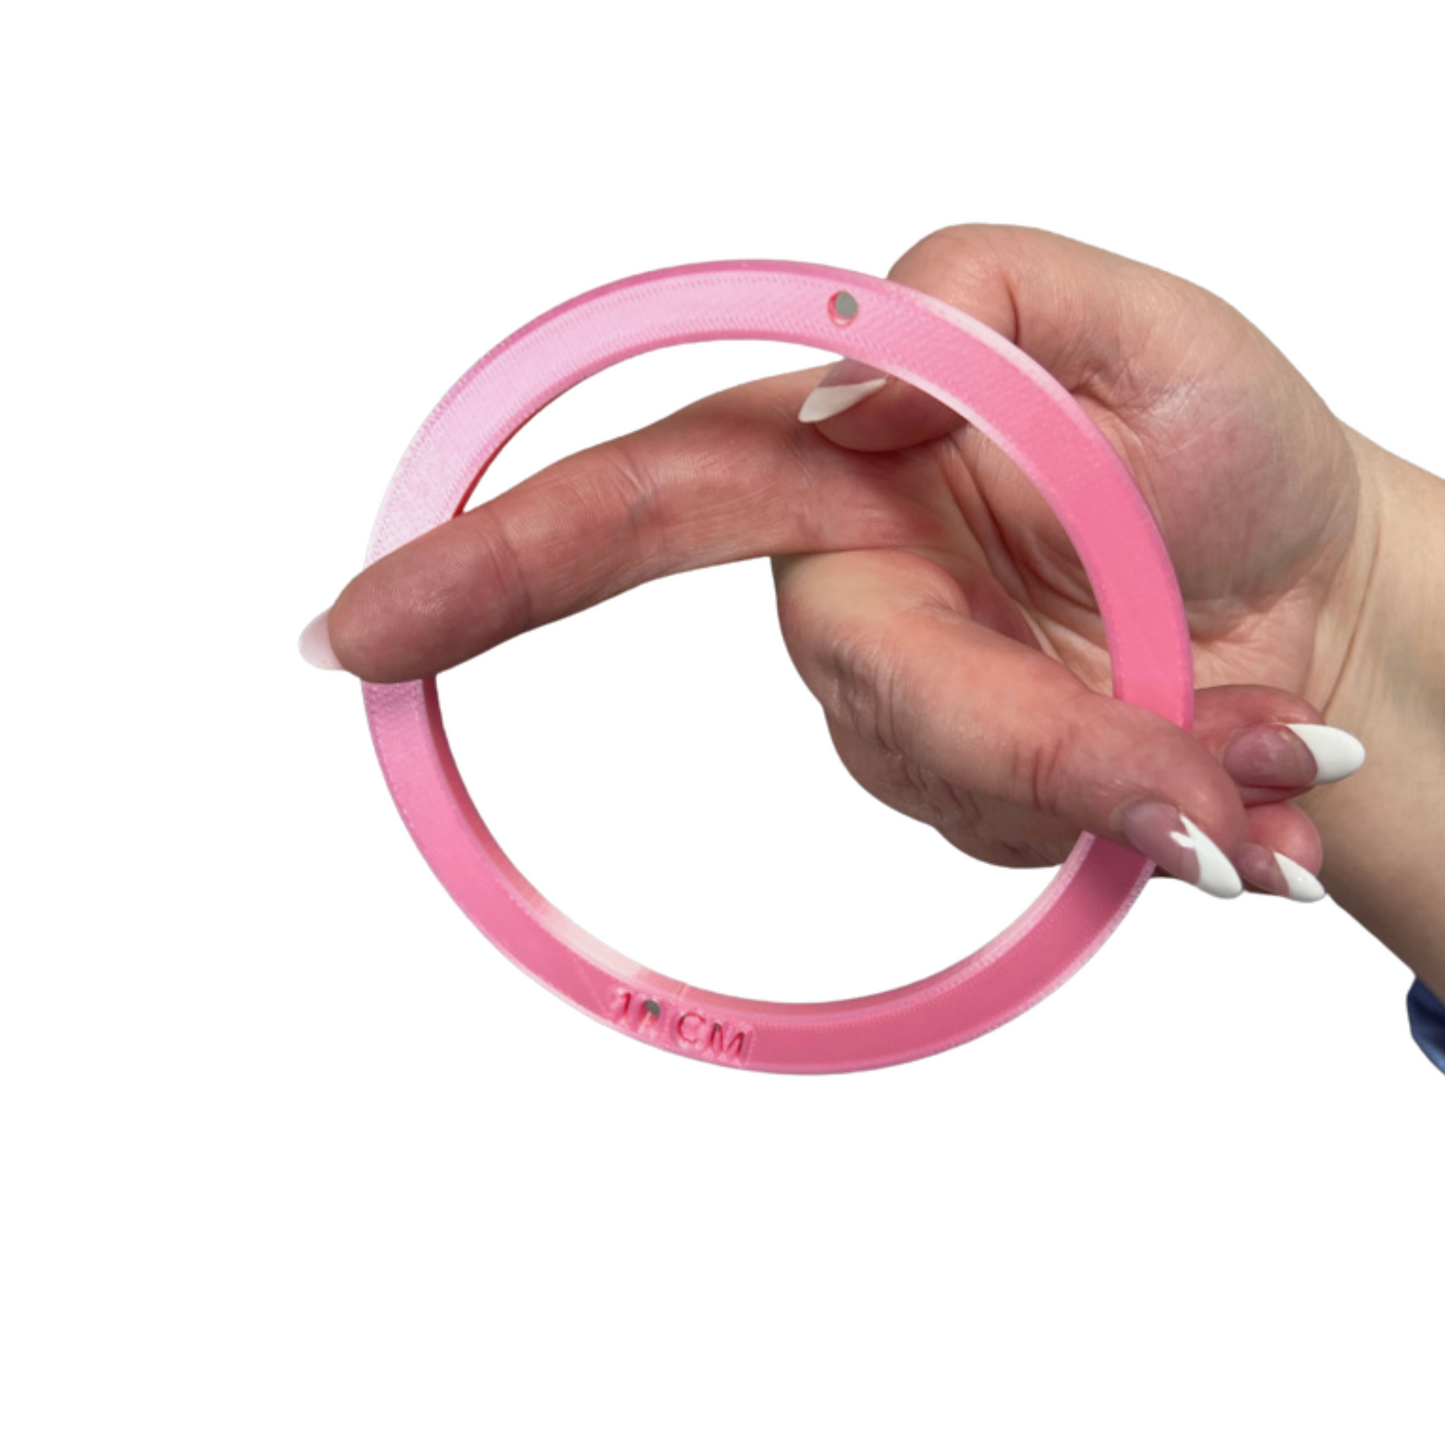 Cervical dilation ring that shows what 10cm dilated looks like